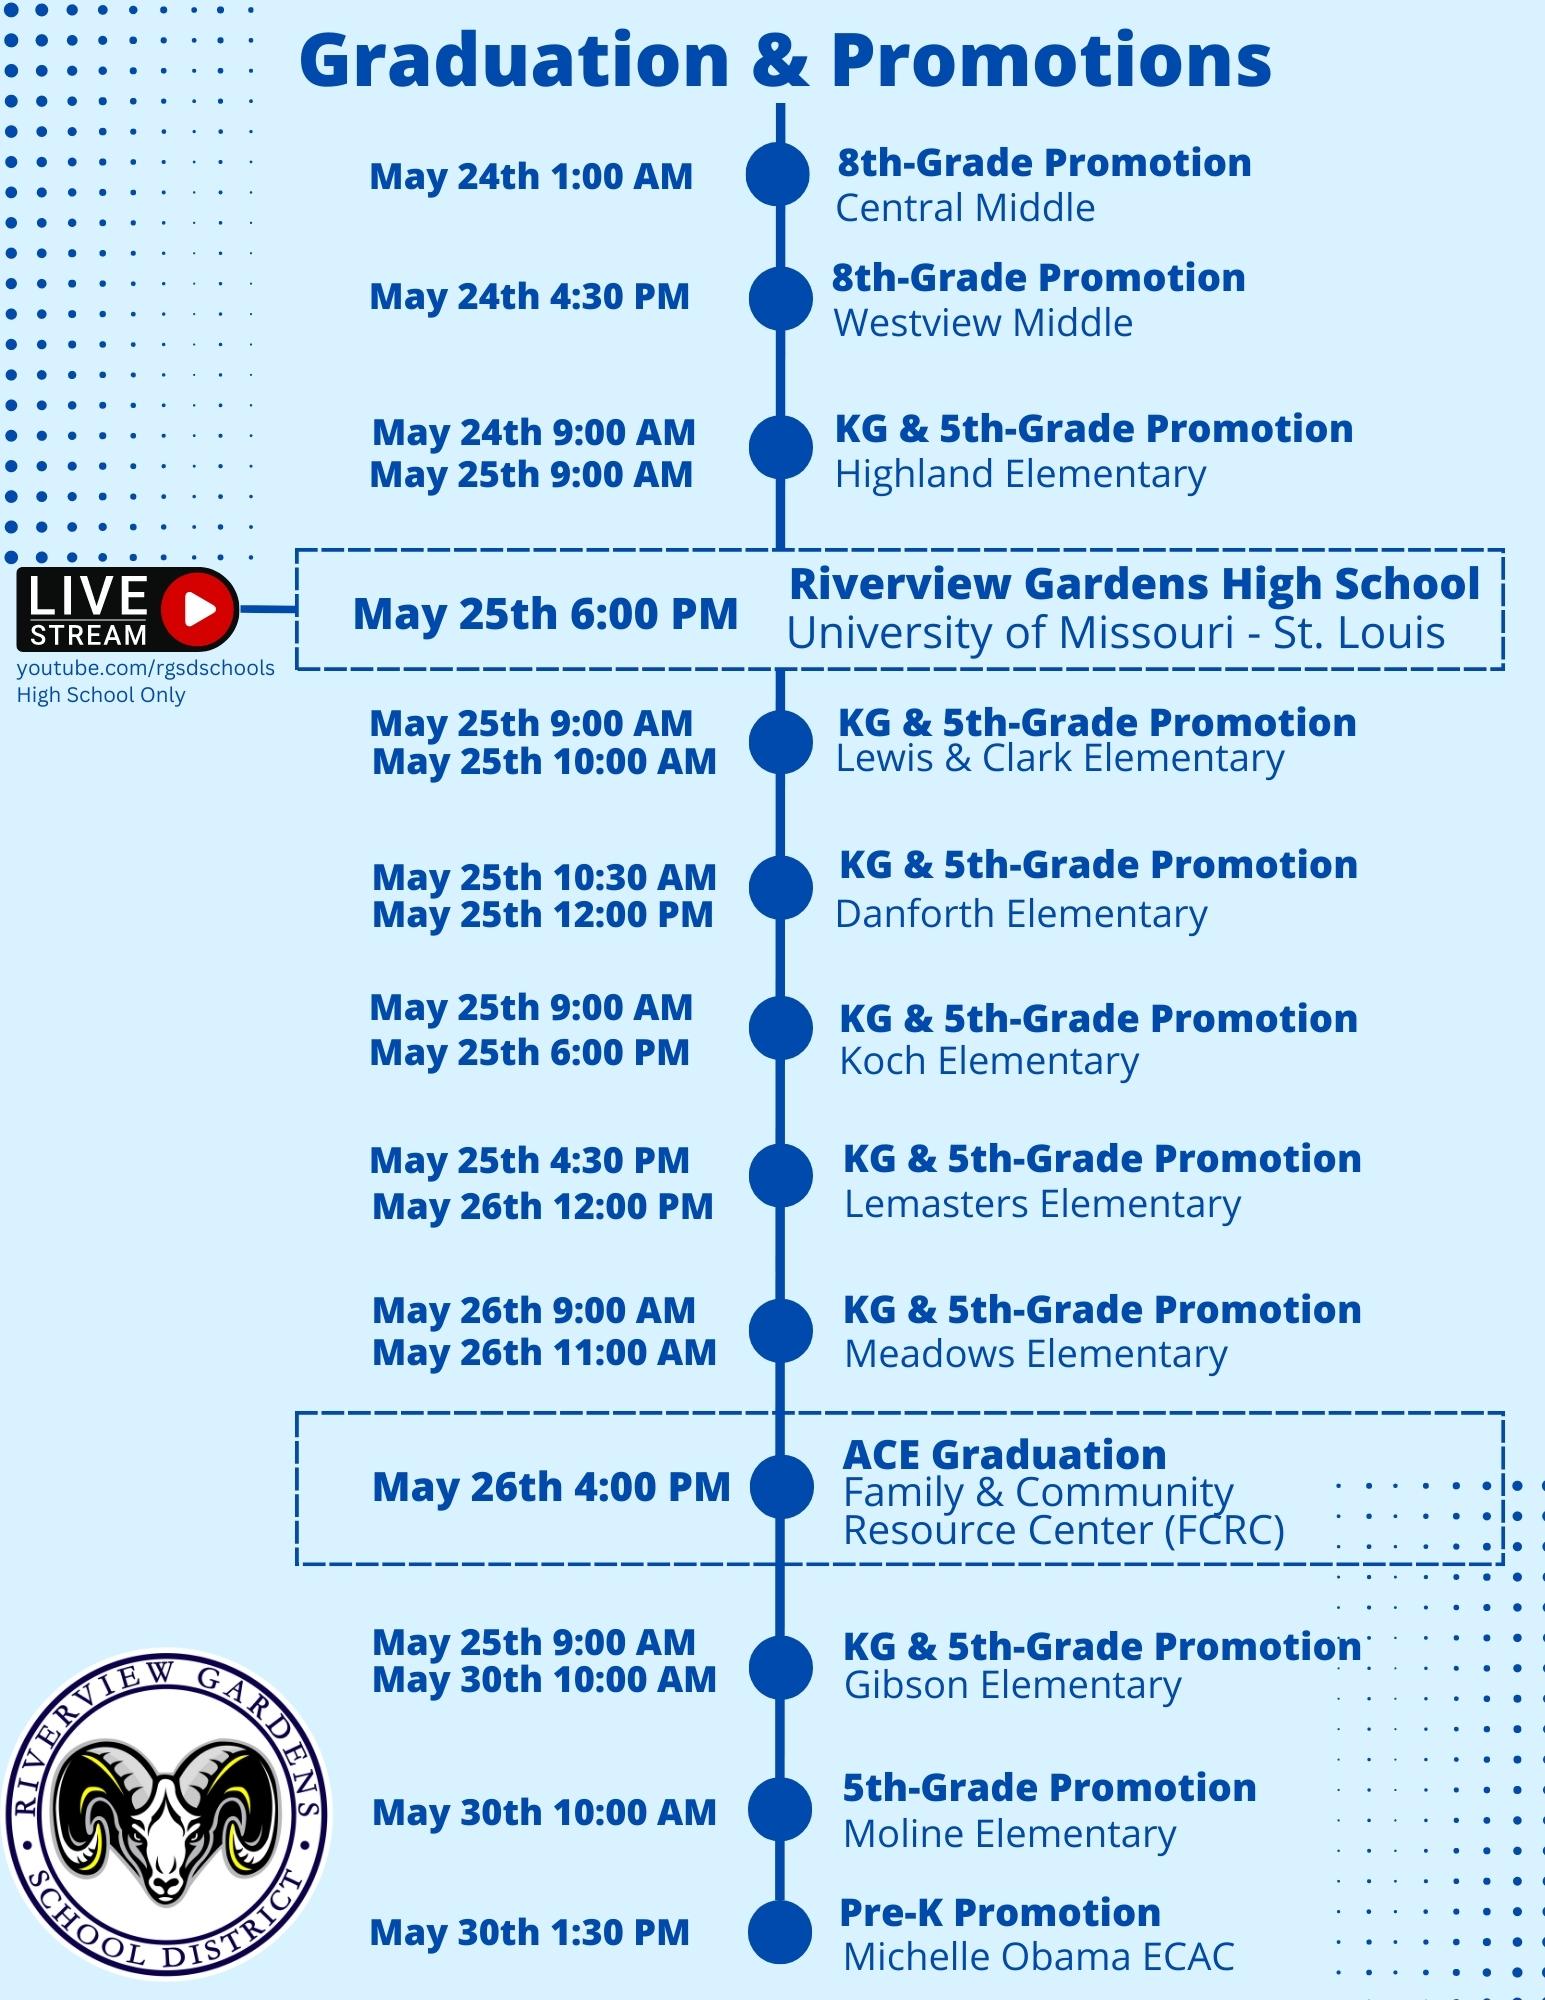 RGSD Graduation and Promotion Schedule